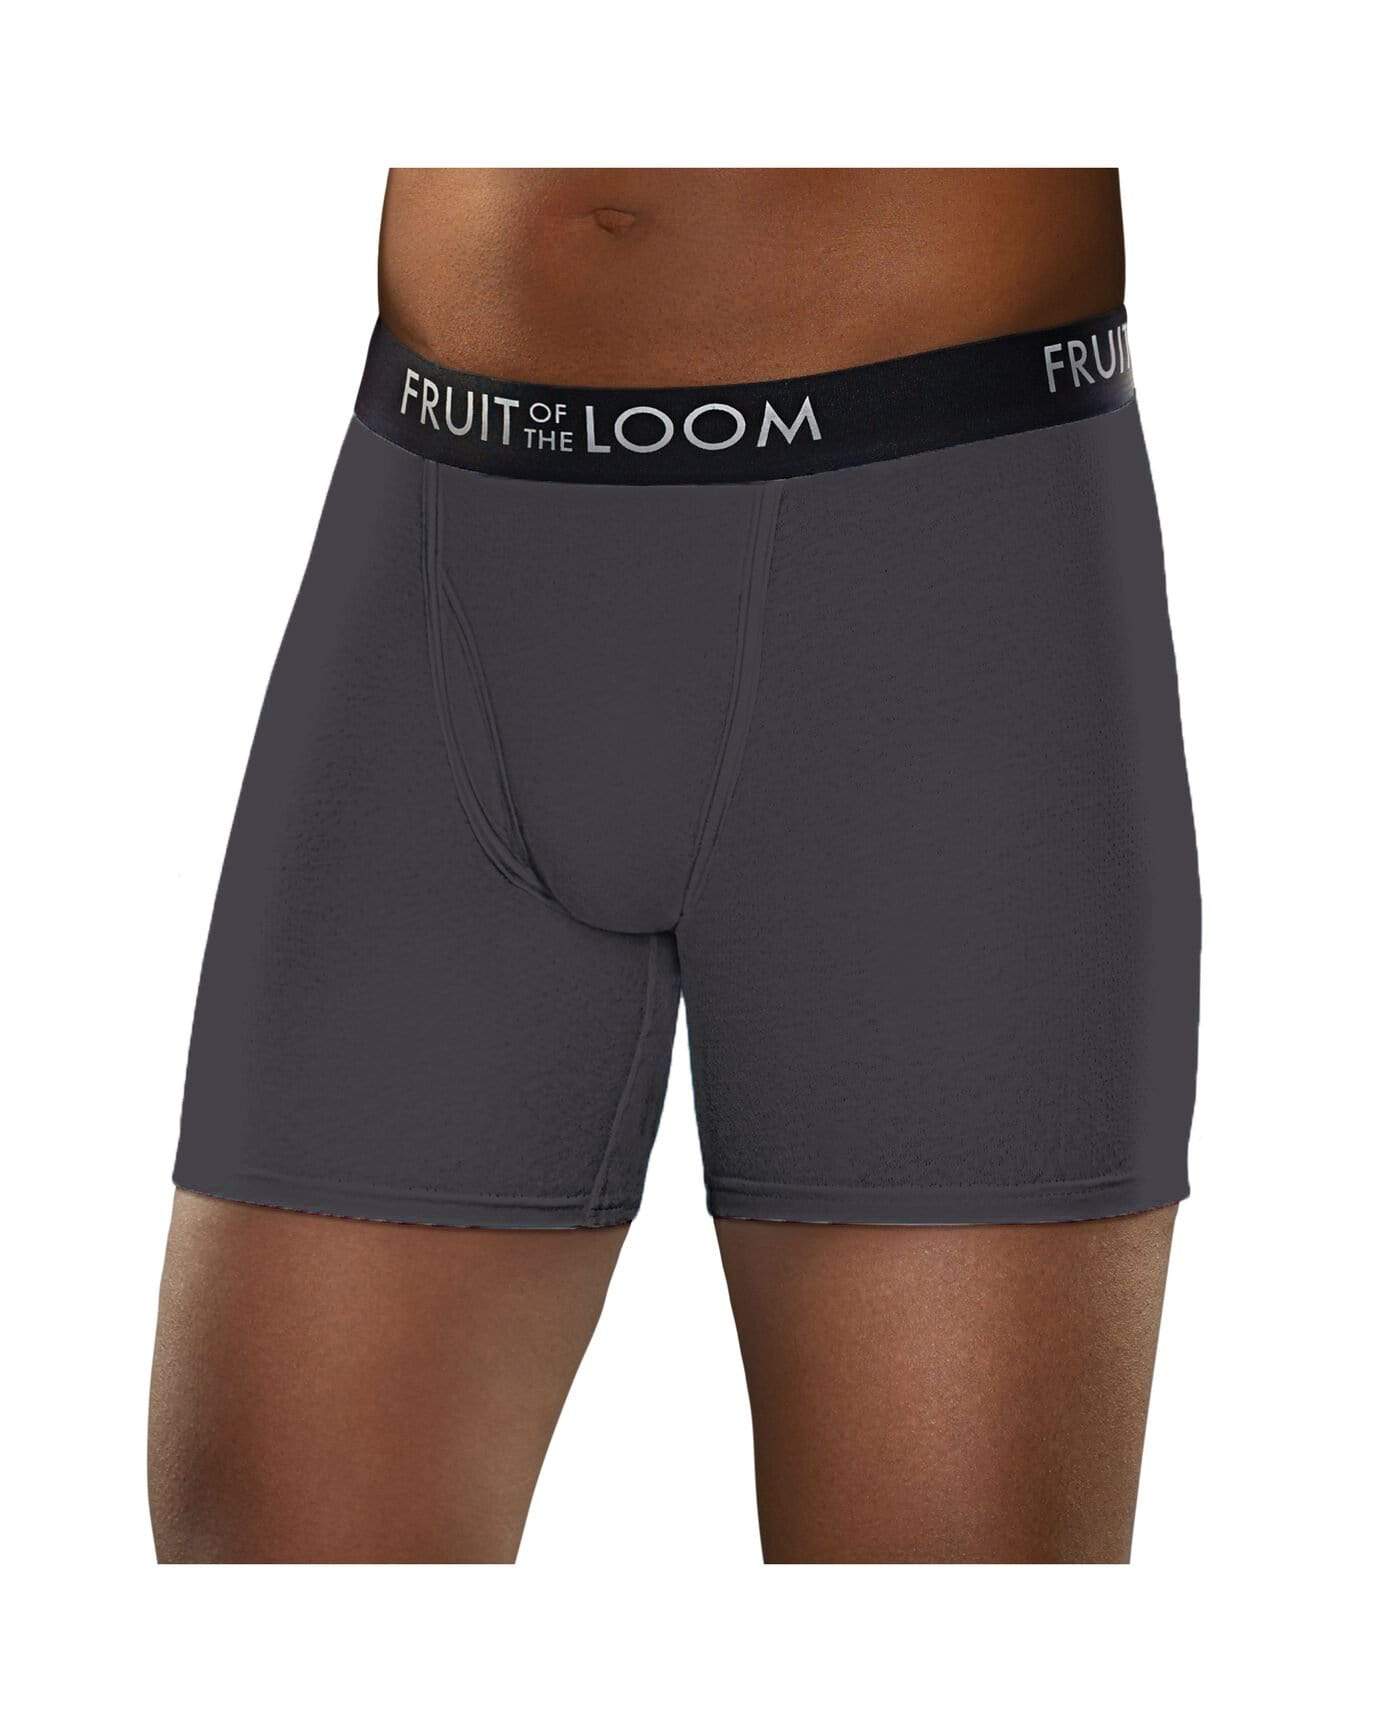 Fruit of the Loom Men's Breathable Cotton Micro-Mesh Briefs, 5 Pack 